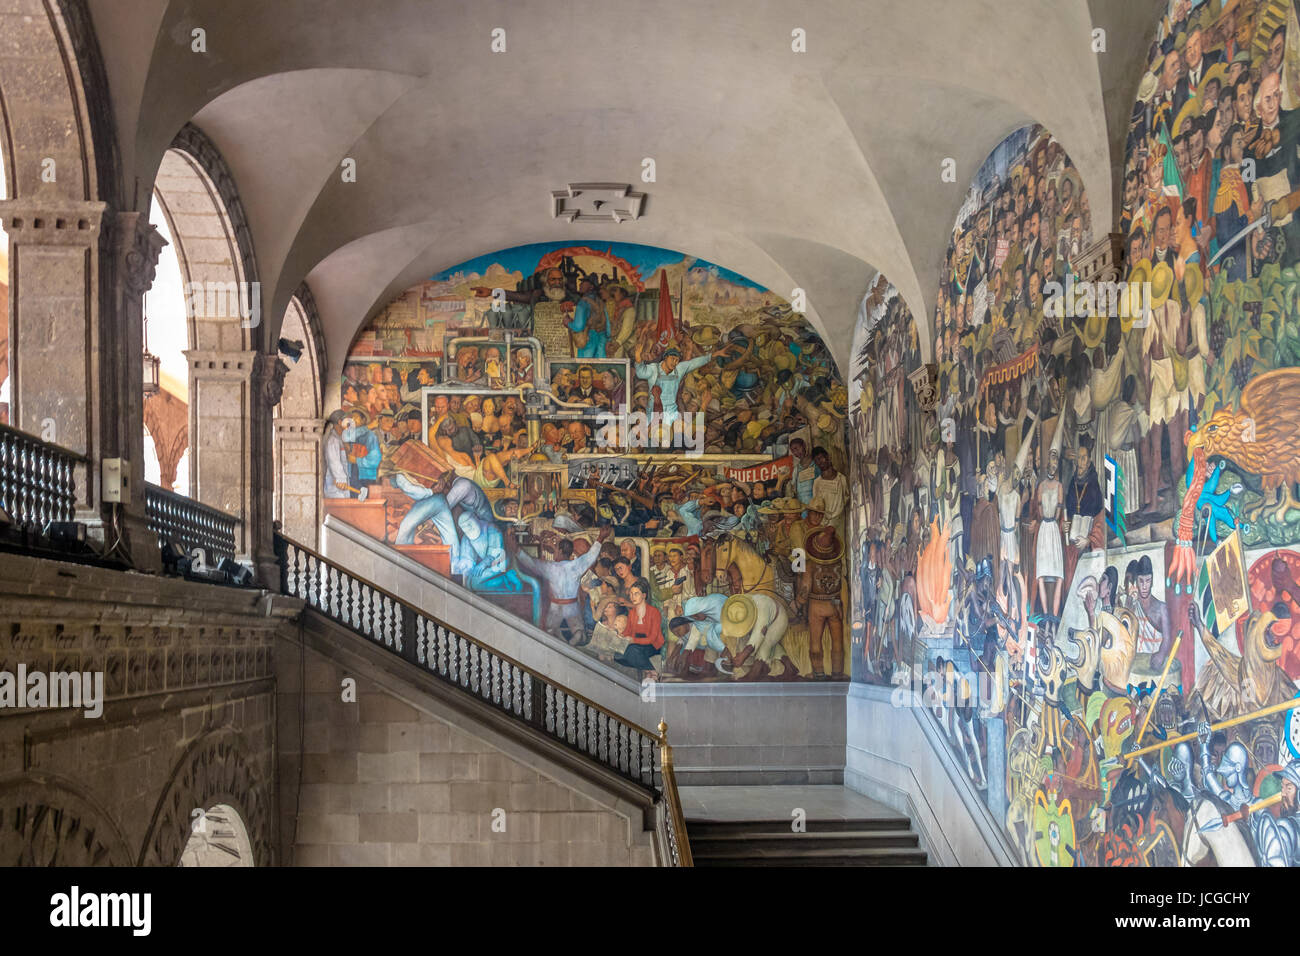 The stairs of National Palace with the famous mural 'Class Struggle' and 'The History of Mexico' by Diego Rivera - Mexico City, Mexico Stock Photo